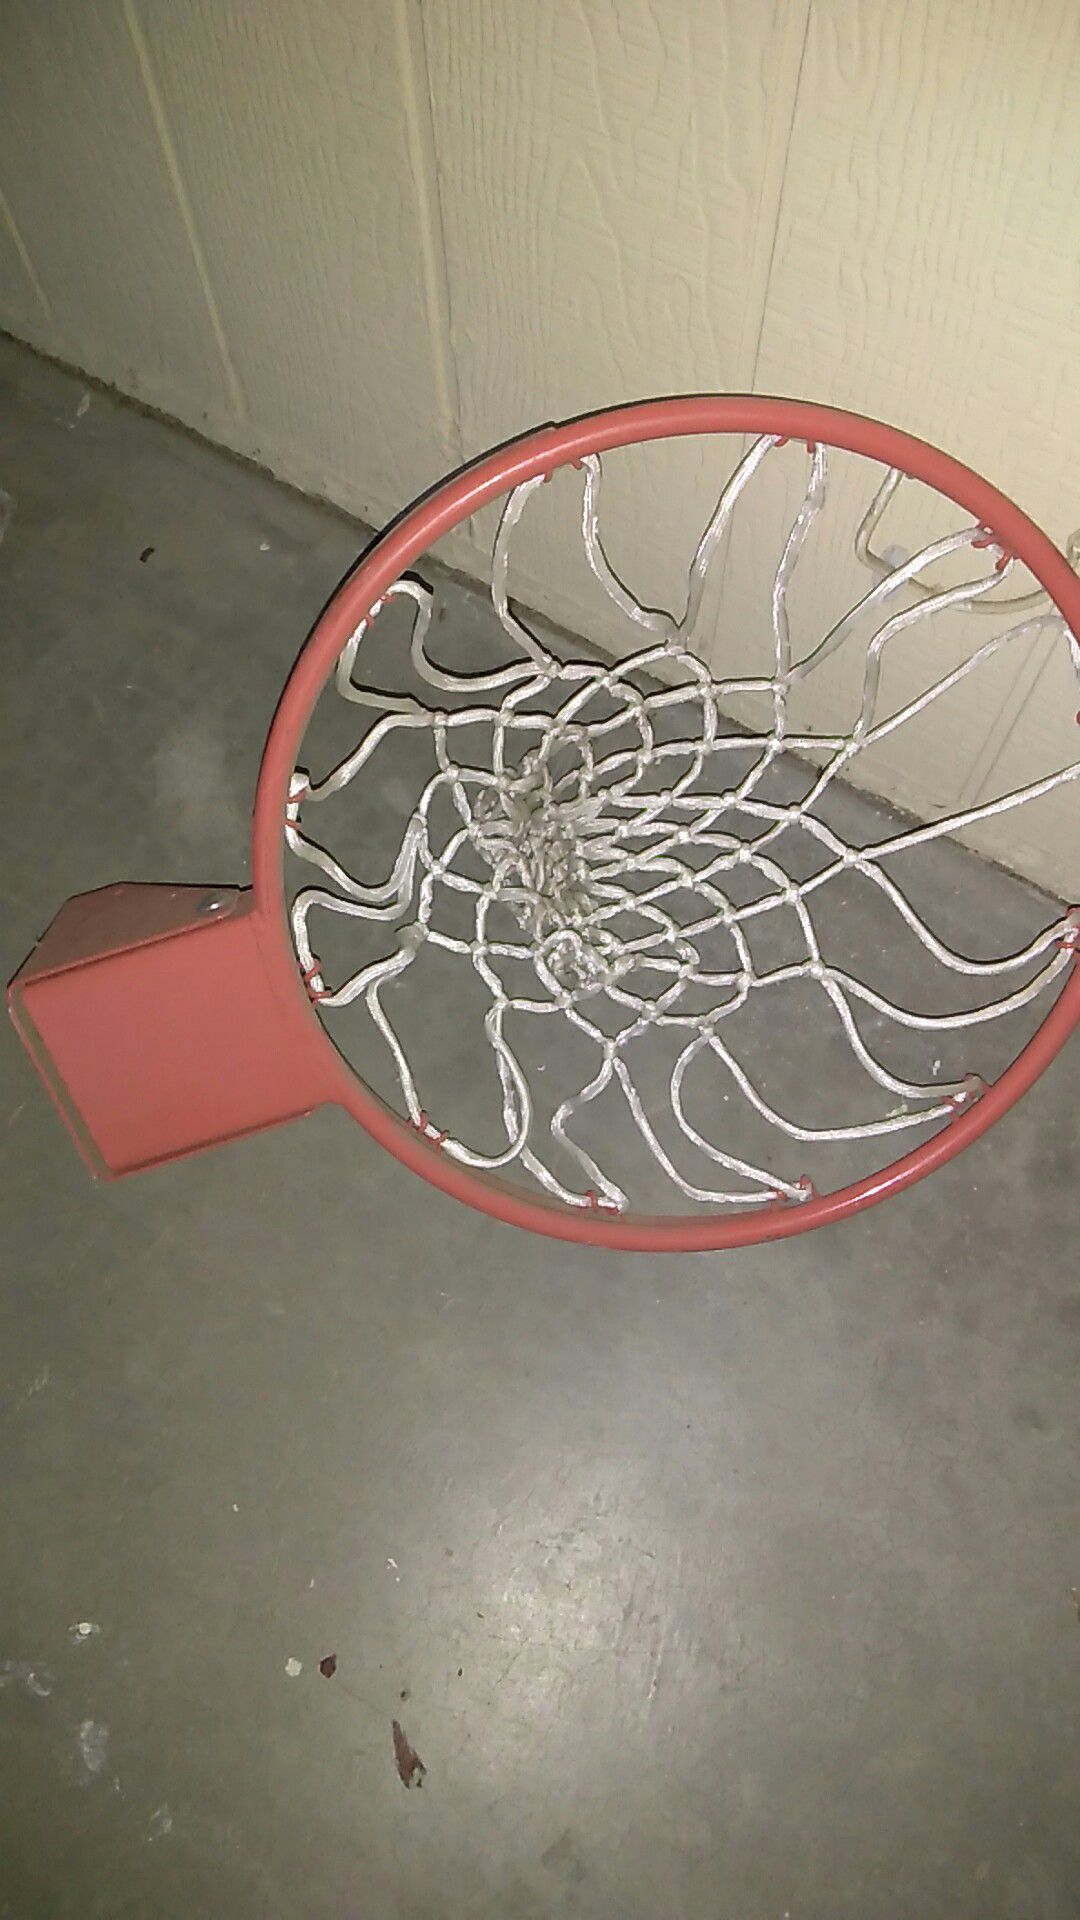 Official size wall mount basketball hoop - Dusty- but, never used